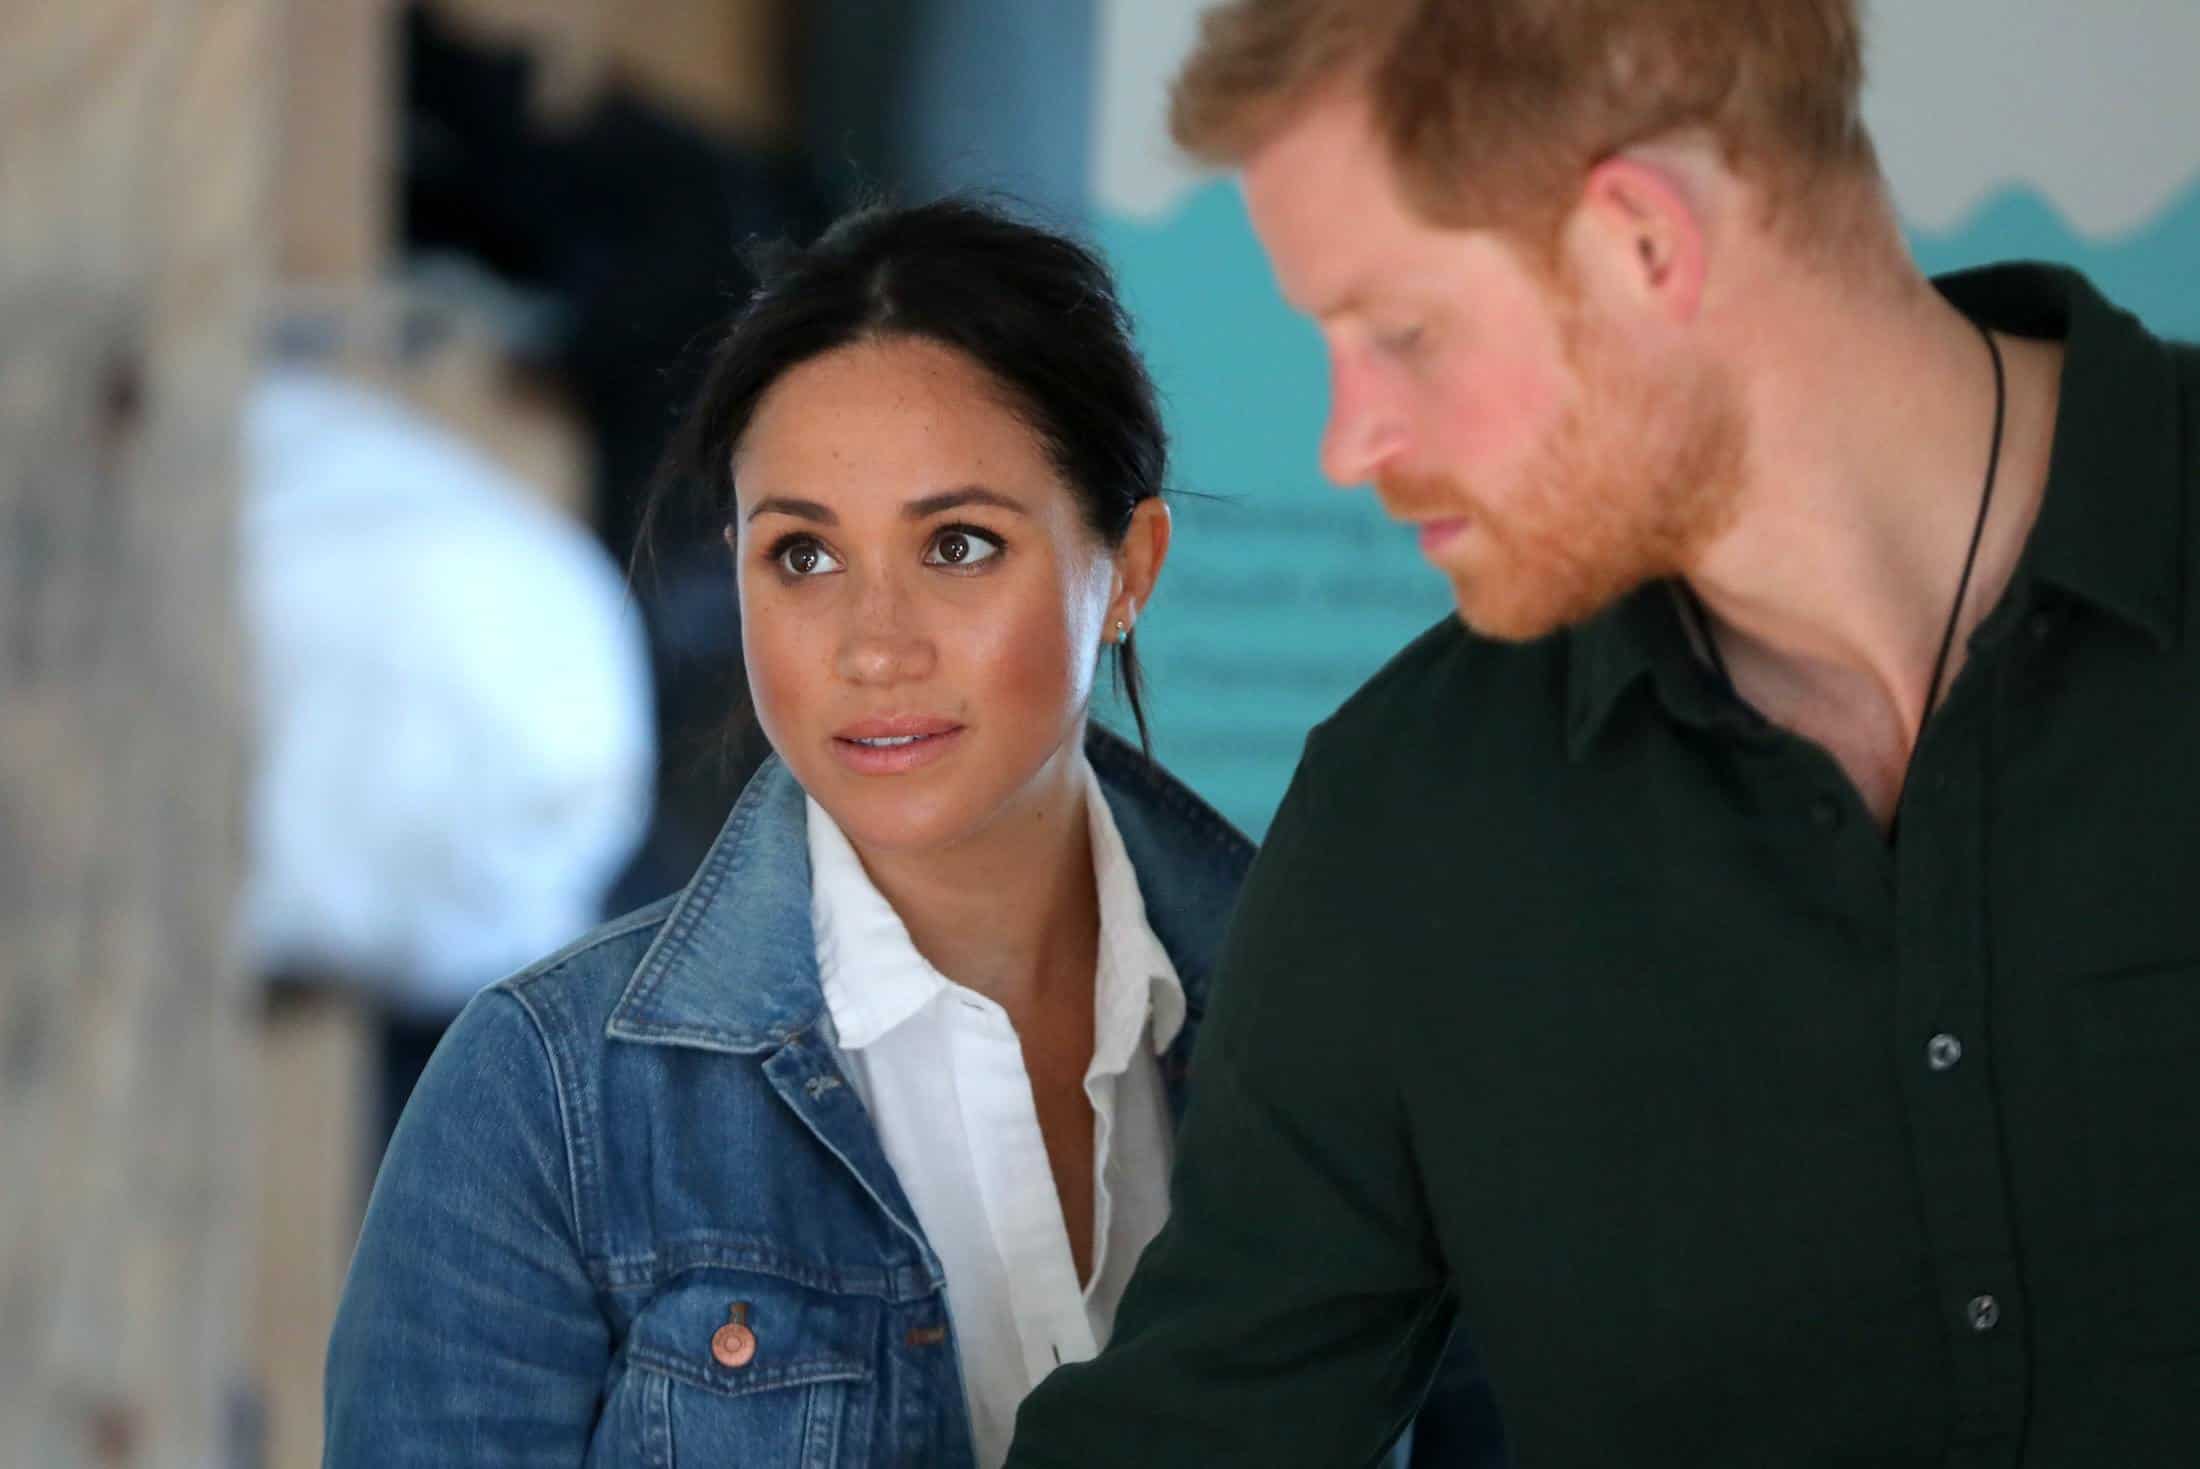 Harry and Meghan tell of ‘almost unsurvivable’ abuse as she was most trolled person in 2019